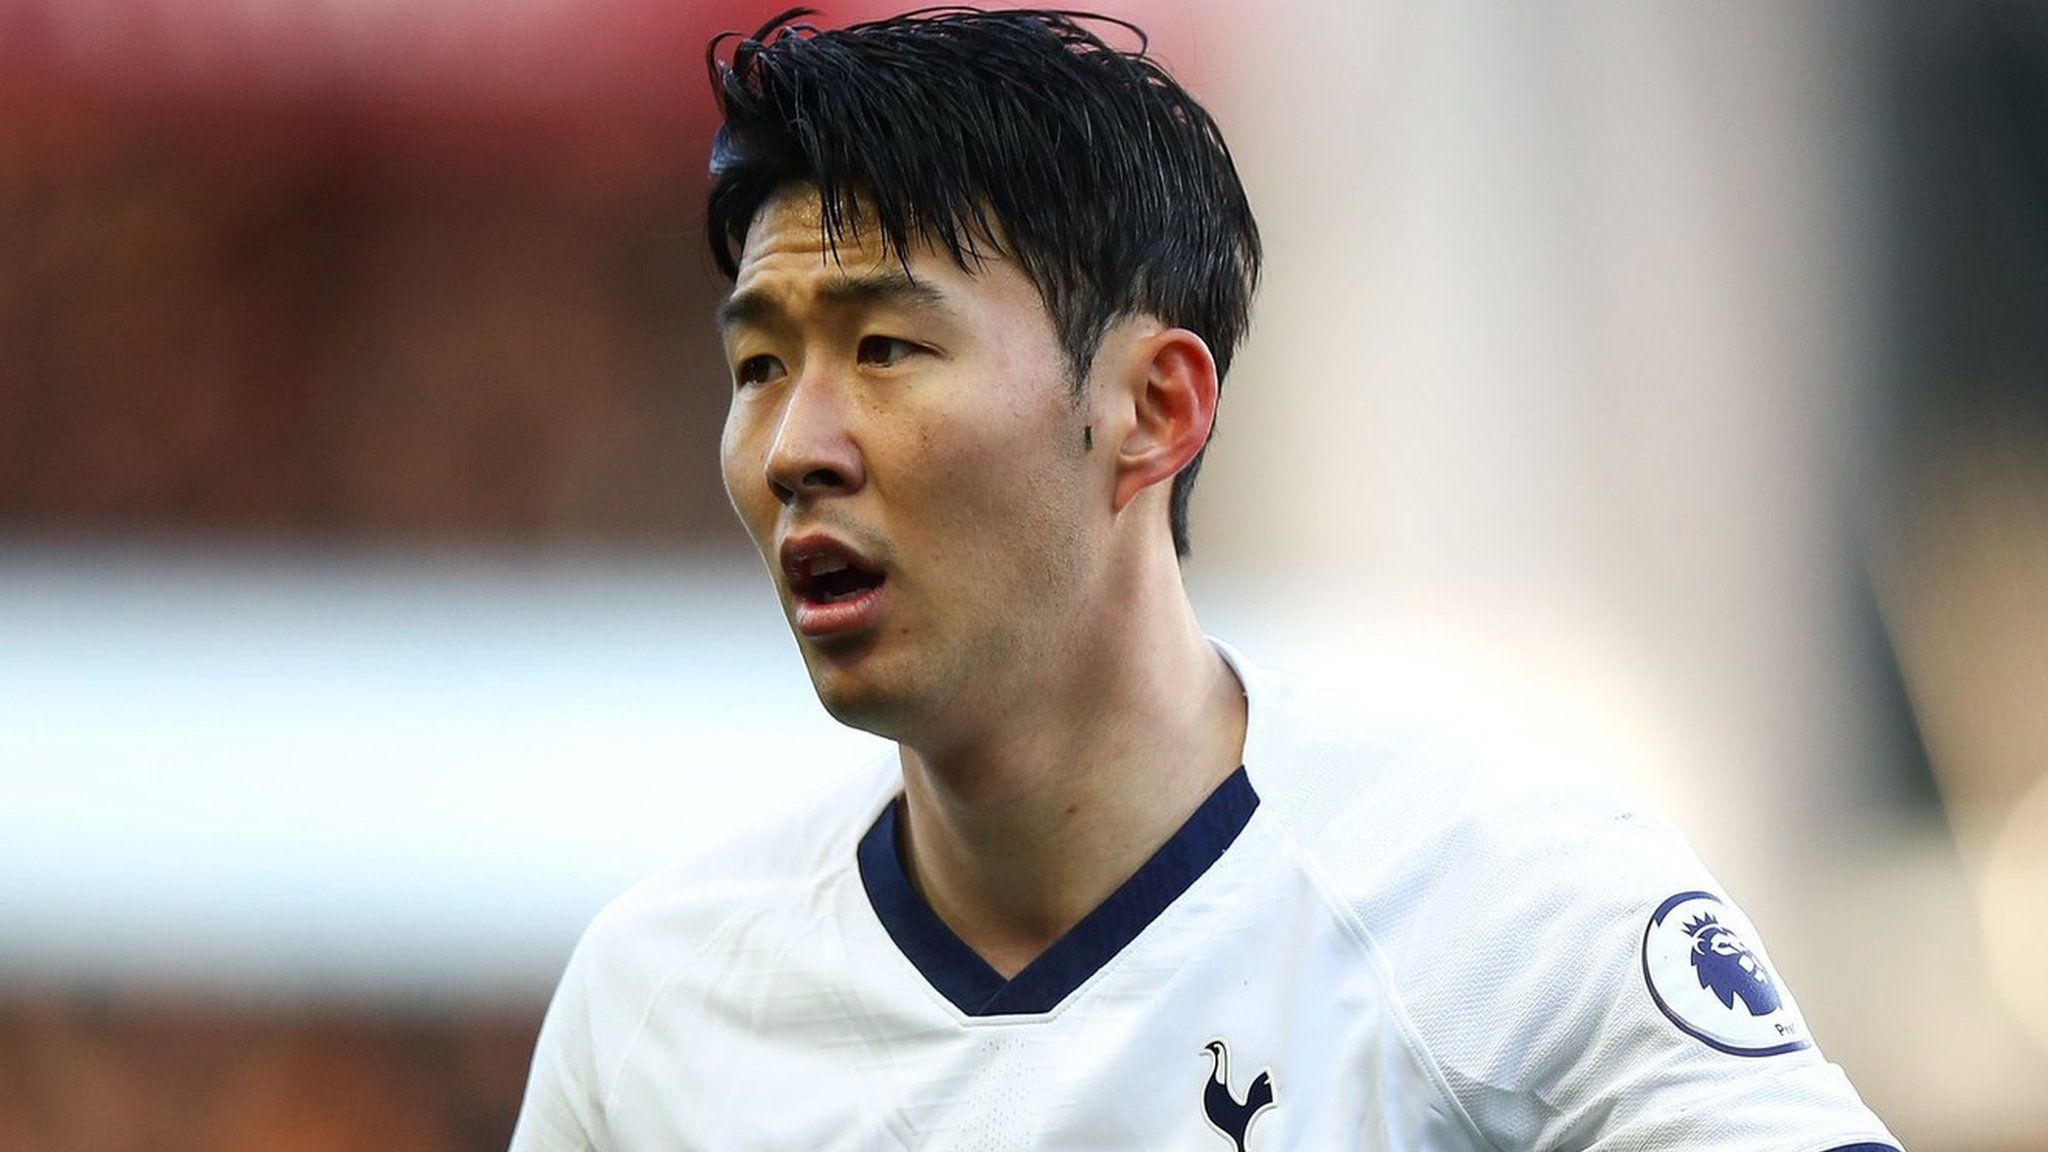 Son Heung-min playing for Tottenham